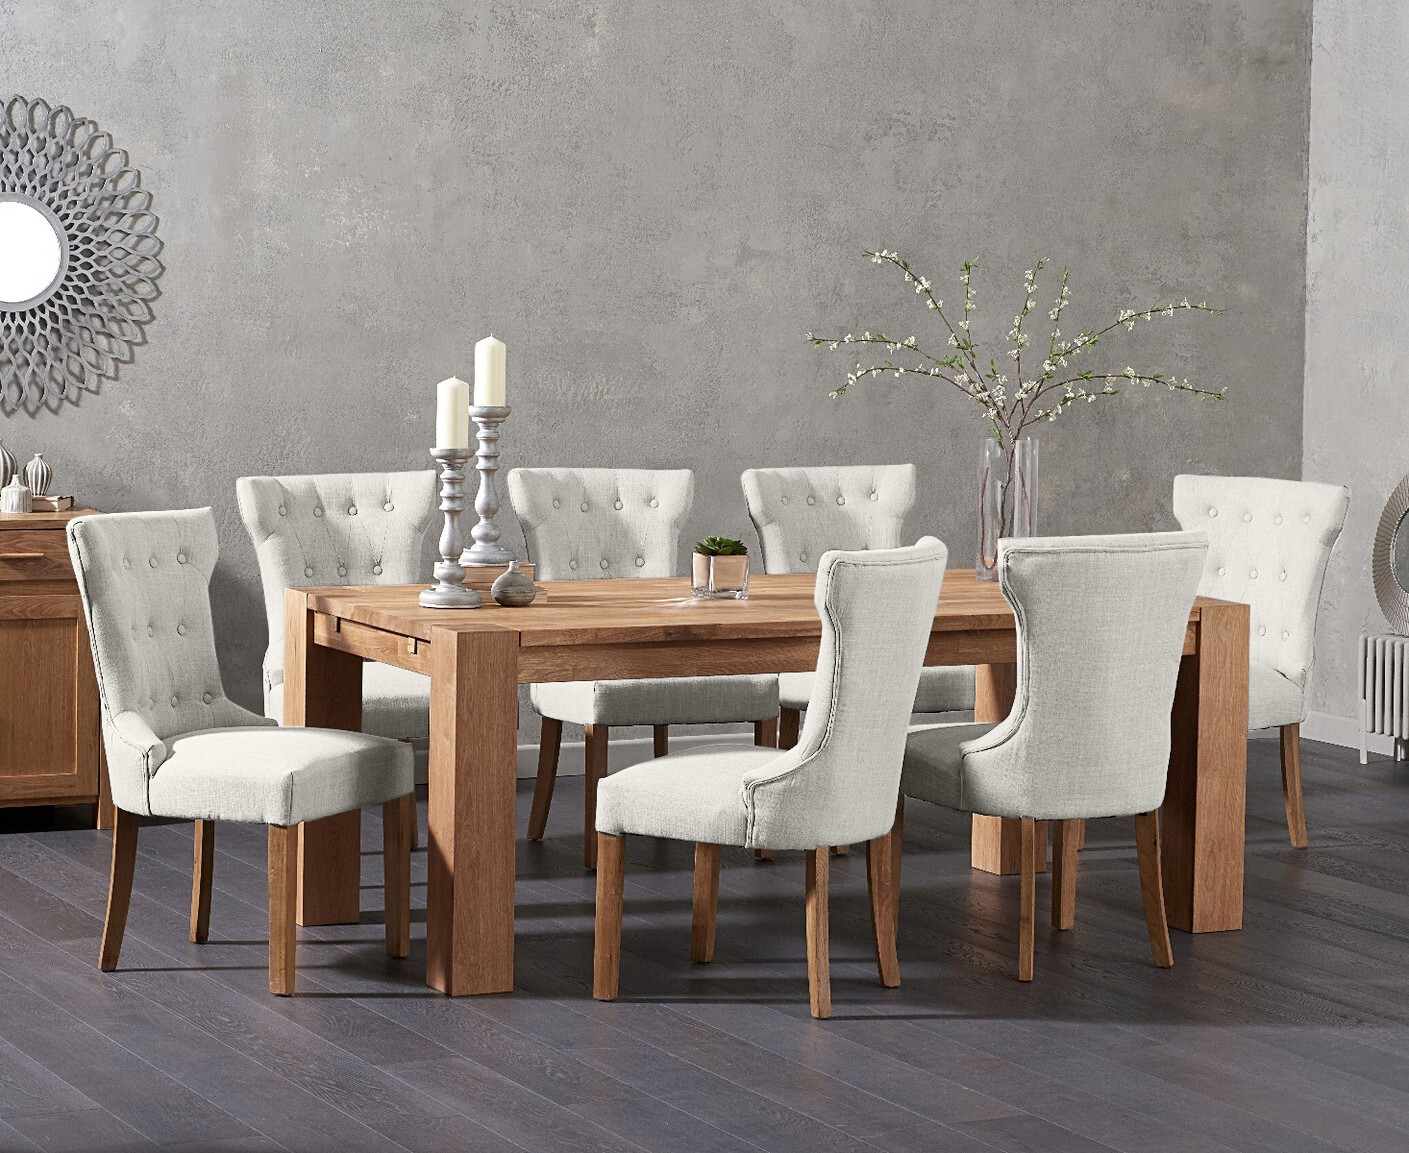 Photo 2 of Sheringham 200cm solid oak dining table with 8 natural clara chairs